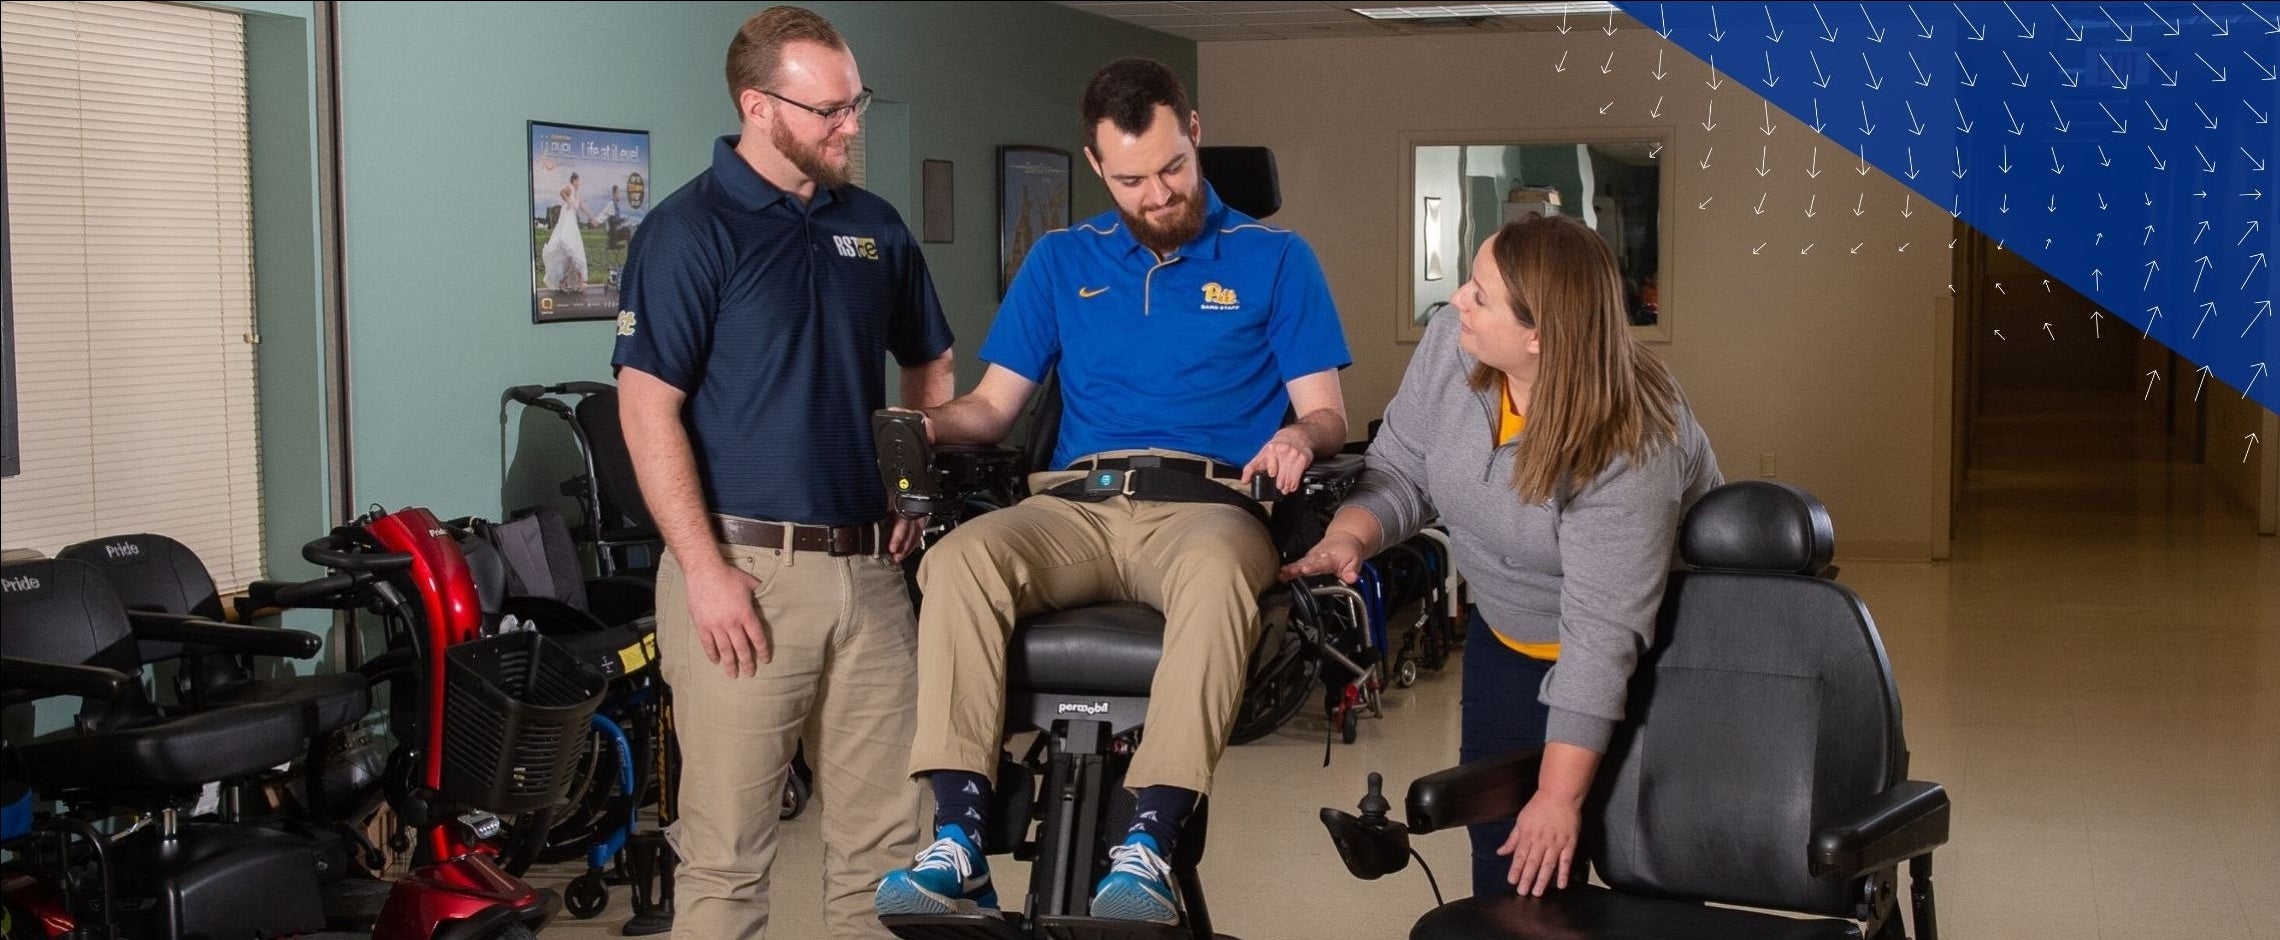 students testing a power wheelchair